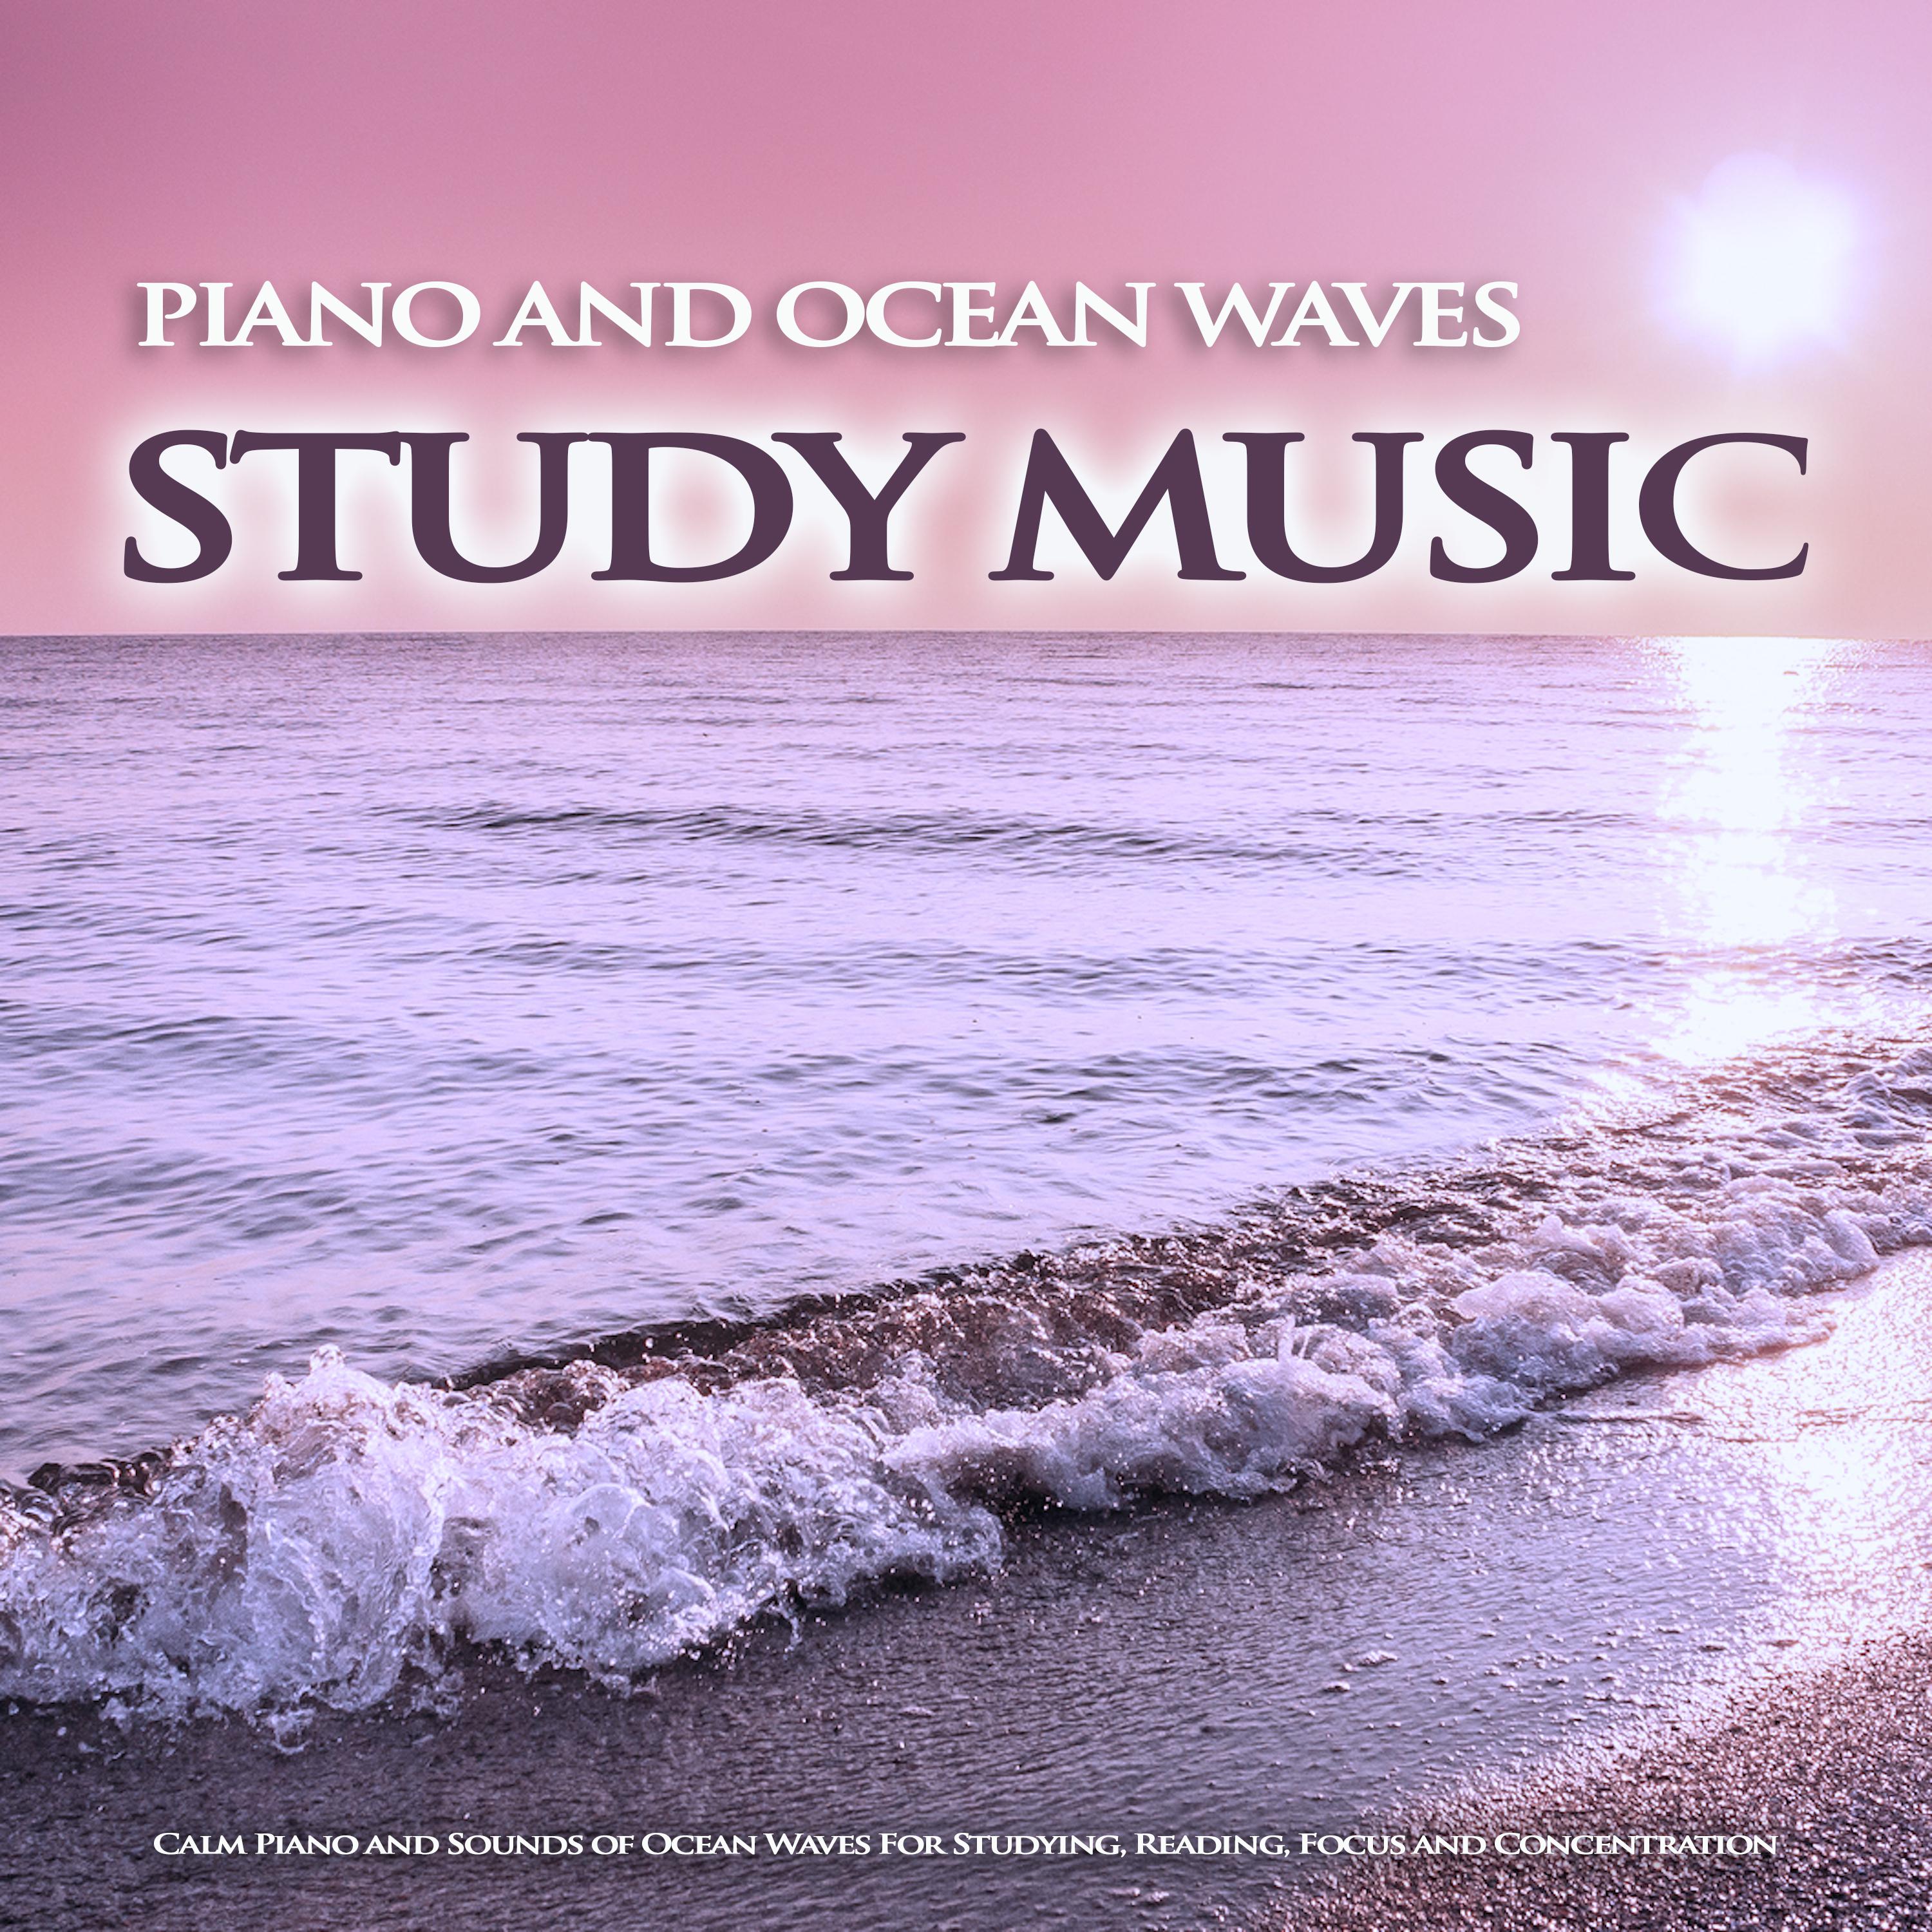 Ocean Waves and Music For Studying